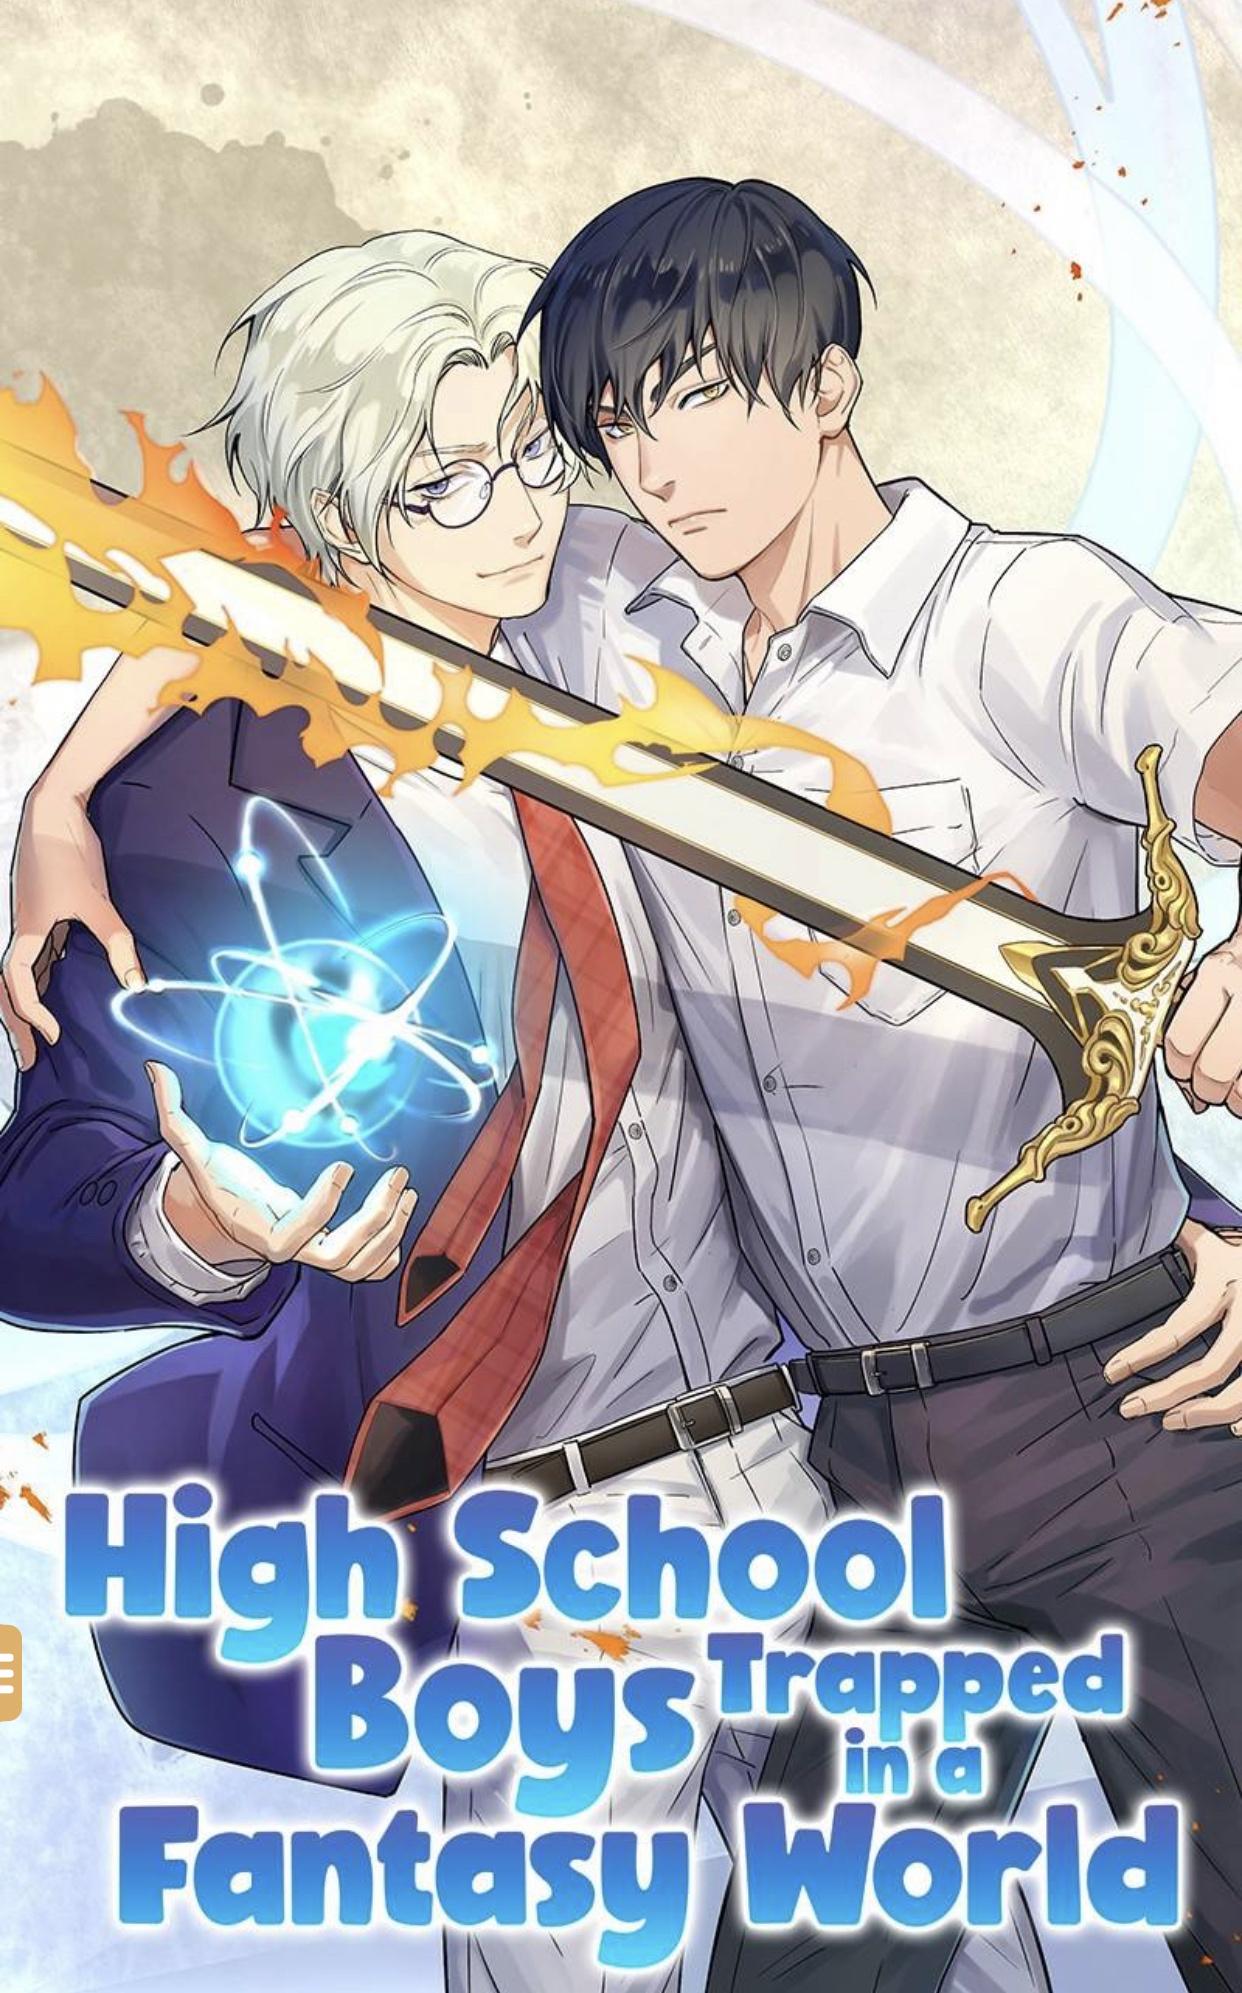 HighSchool boys trapped in a fantasy world thumbnail